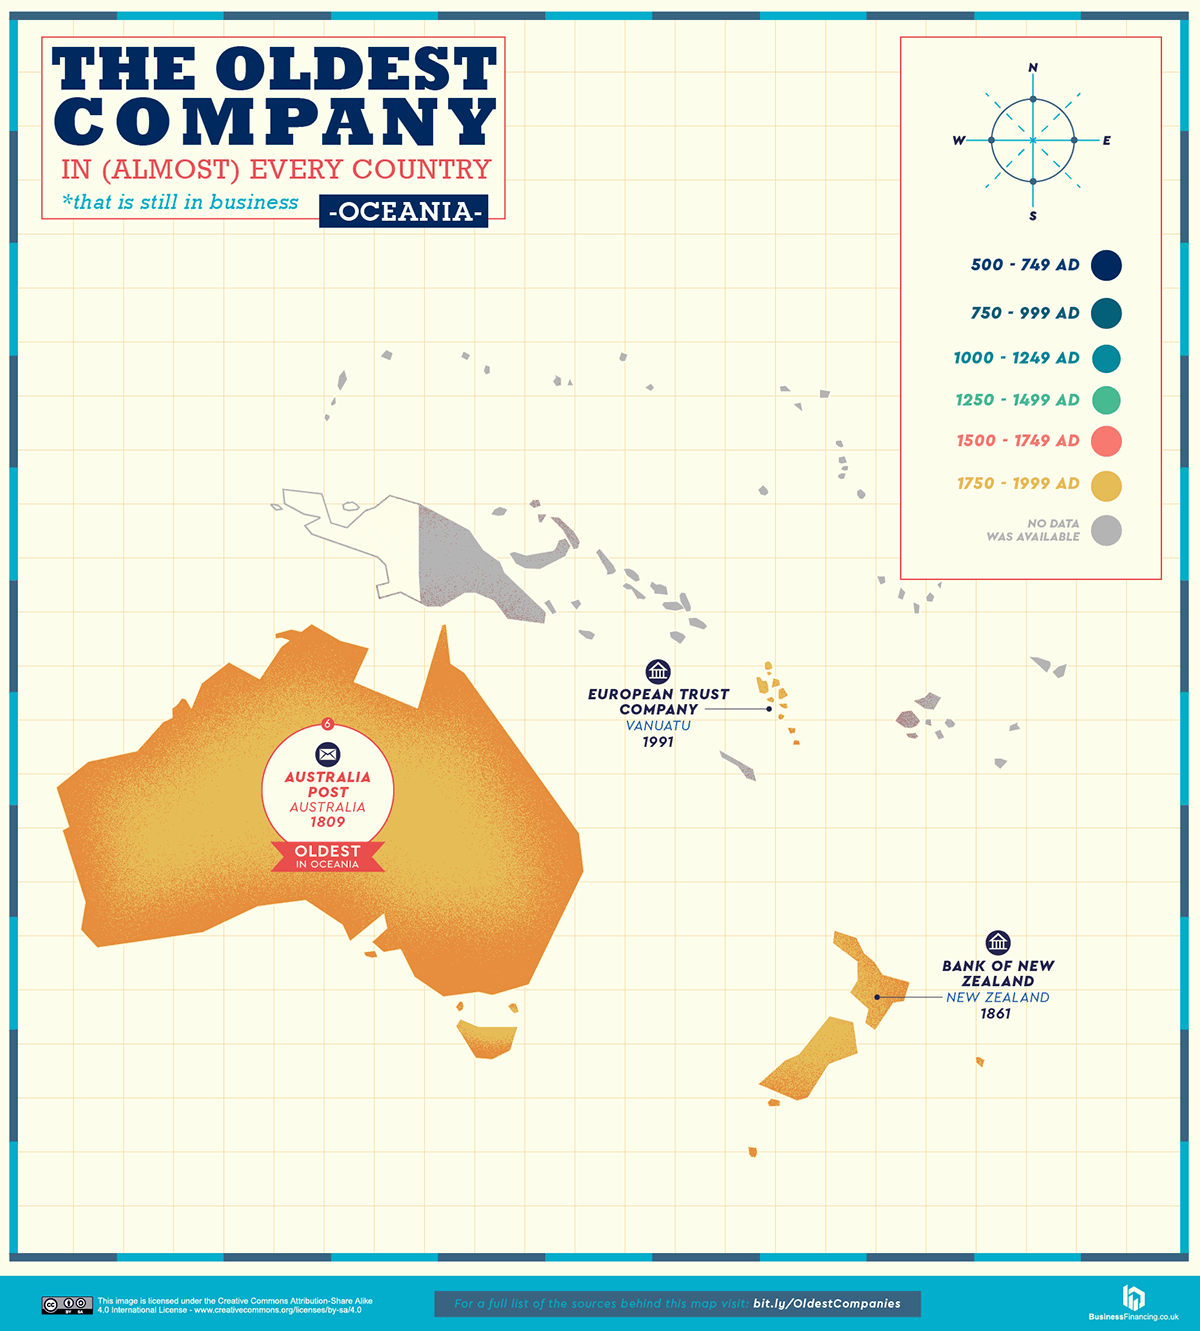 The oldest companies in Oceania.